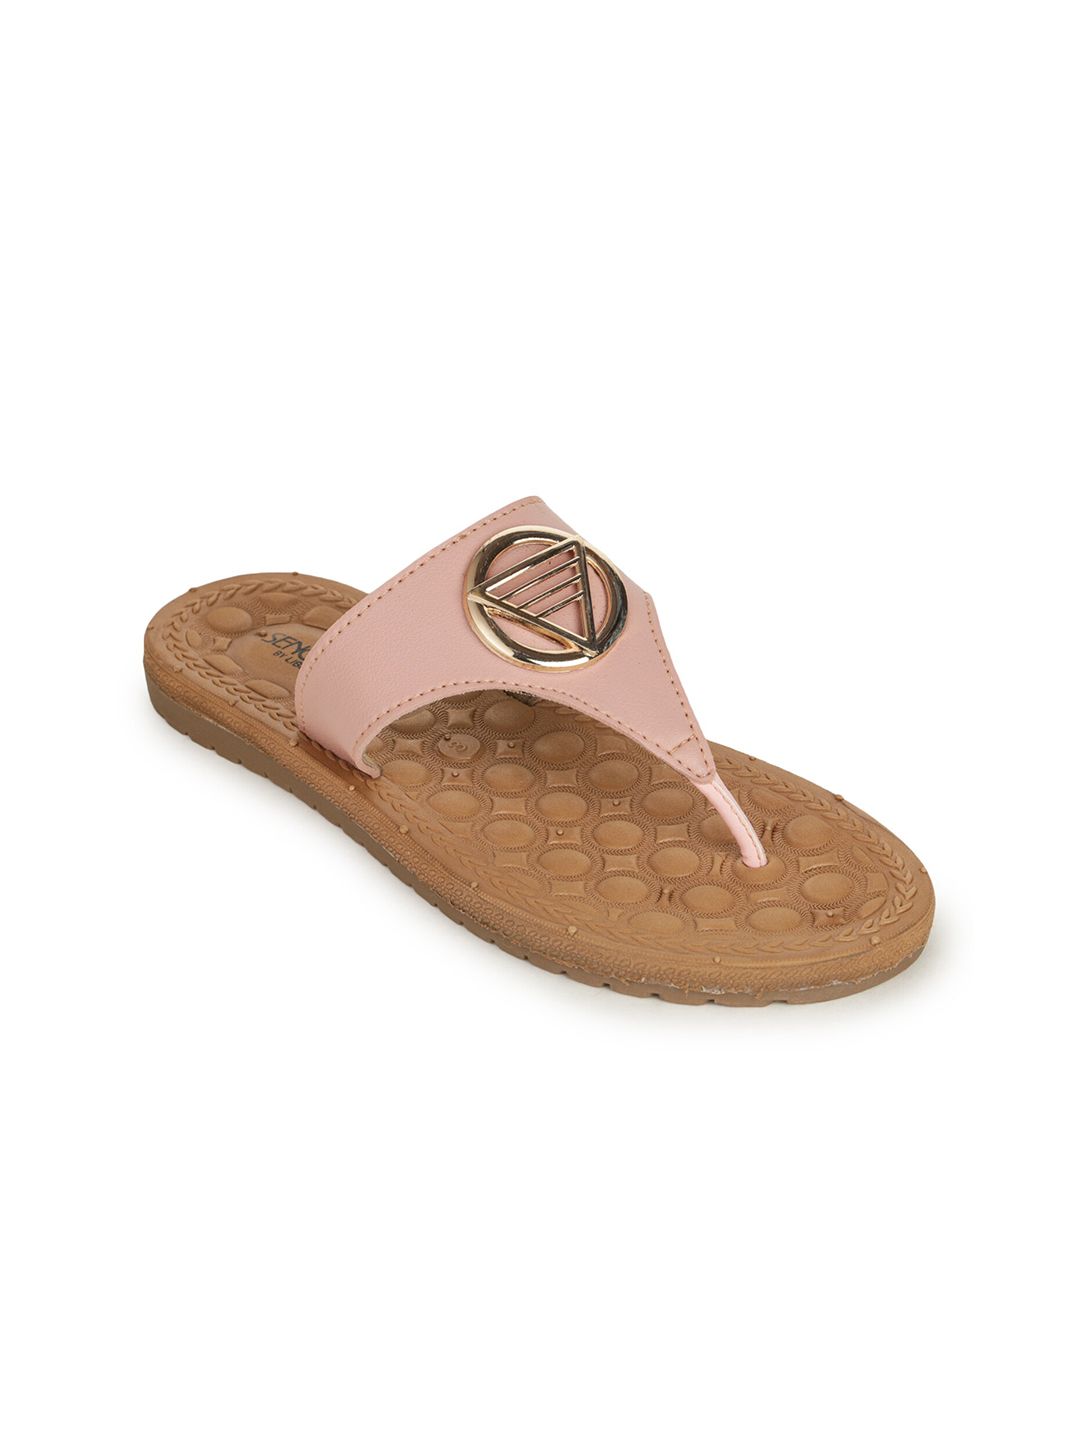 Liberty Women Pink Rubber Thong Flip-Flops Price in India